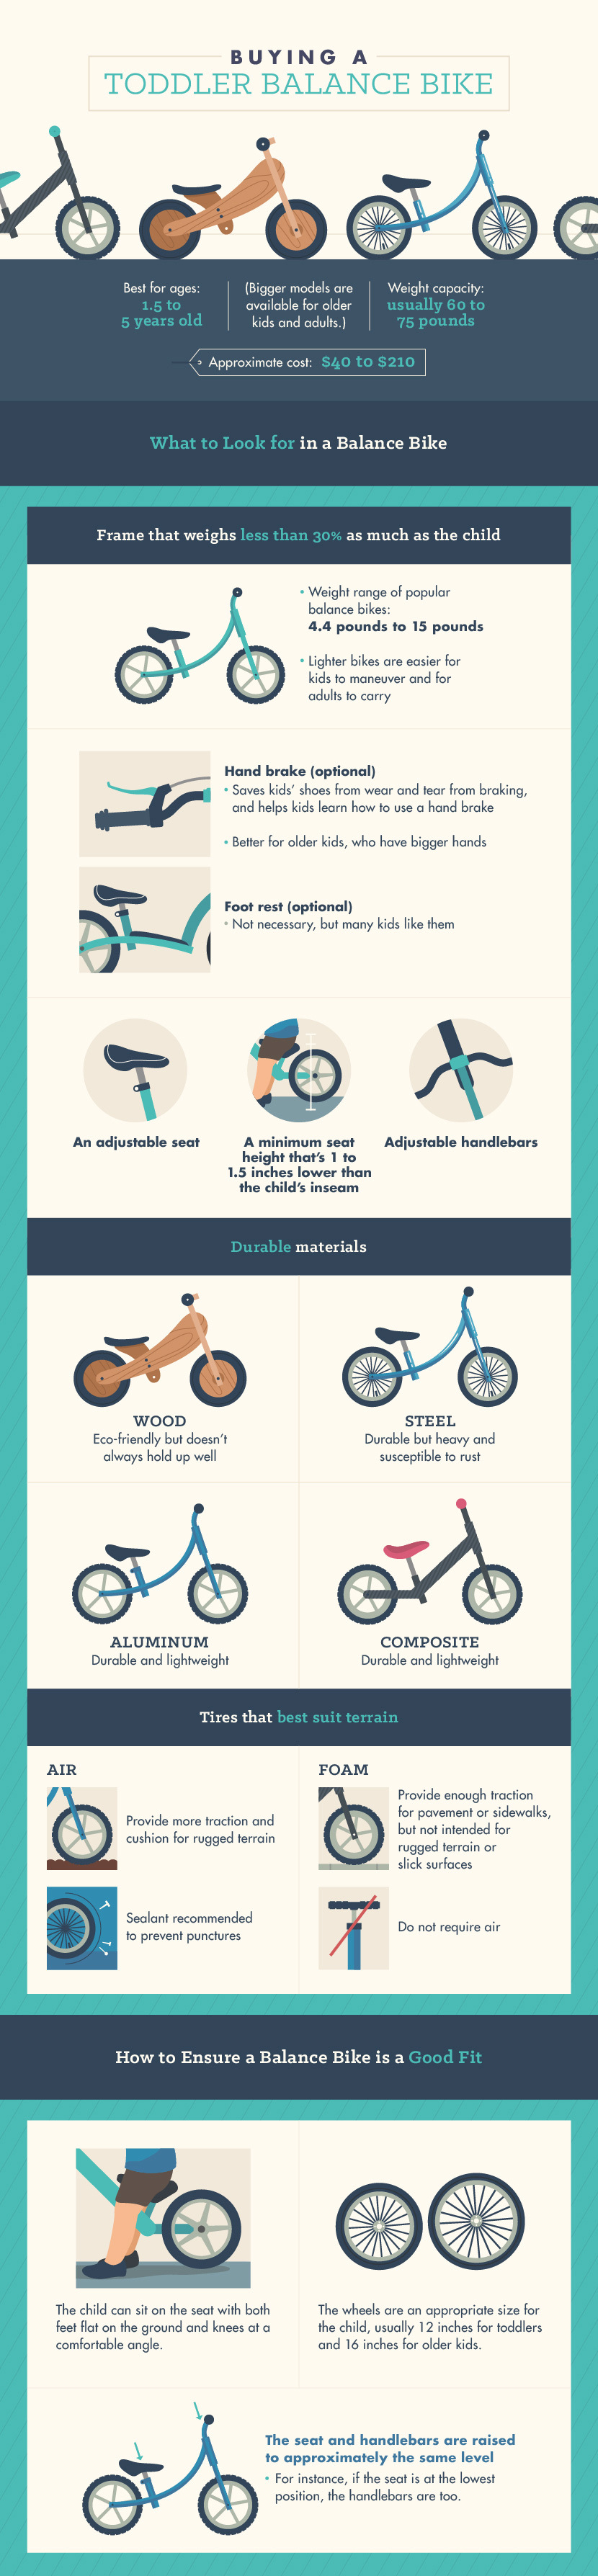 what age to get a balance bike